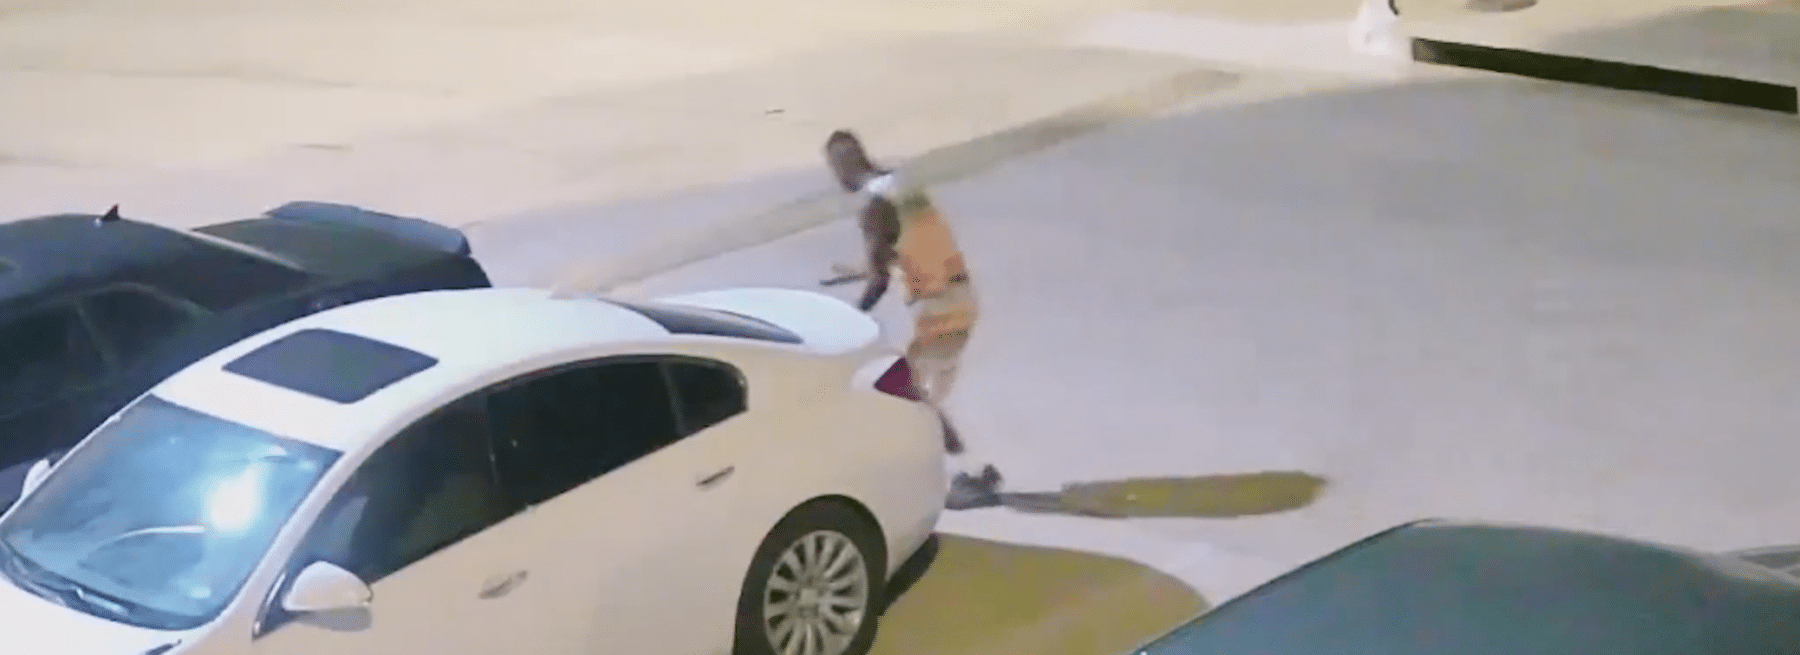 Teens prowling a Texas apartment parking lot